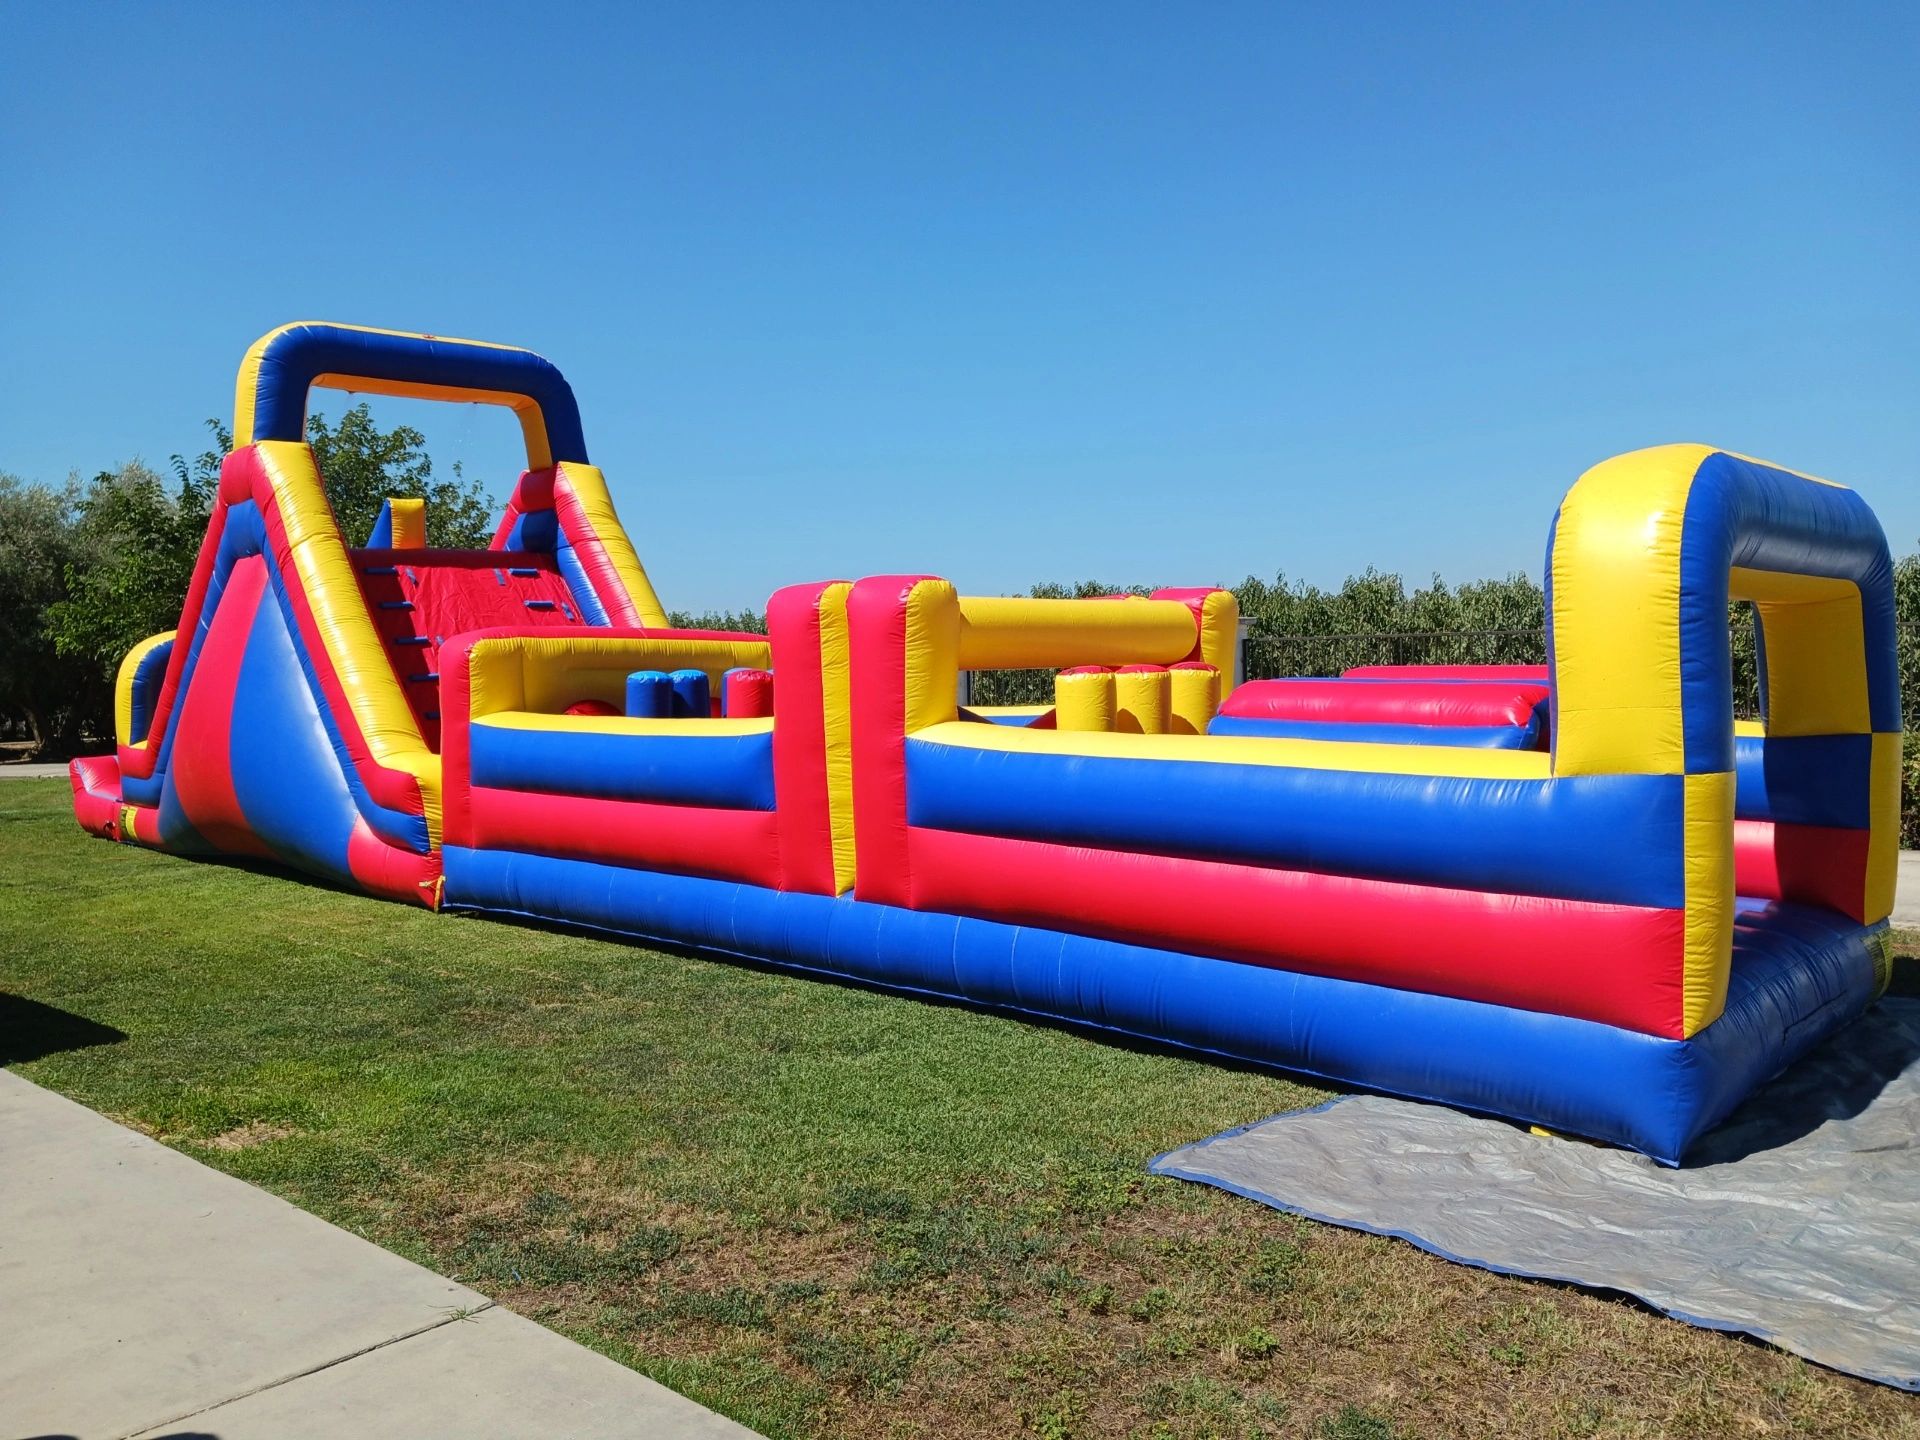 Primary colored obstacle course available